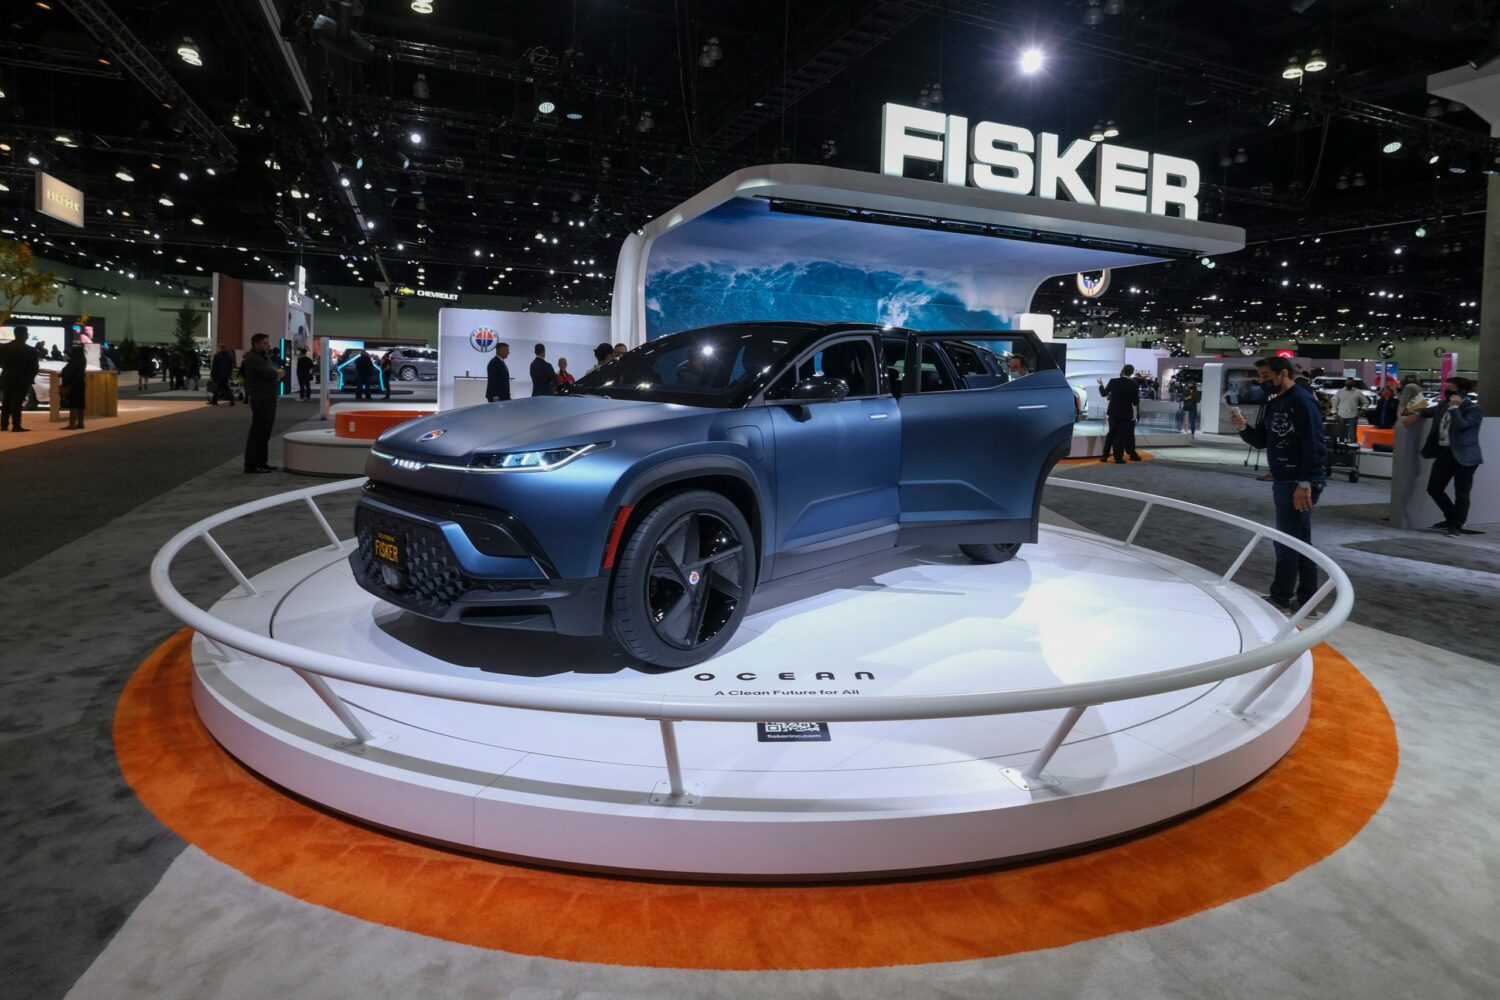 In its quarterly financial report, Fisker announced it was cutting its yearly production goal to a range of 32,000 to 36,000 units